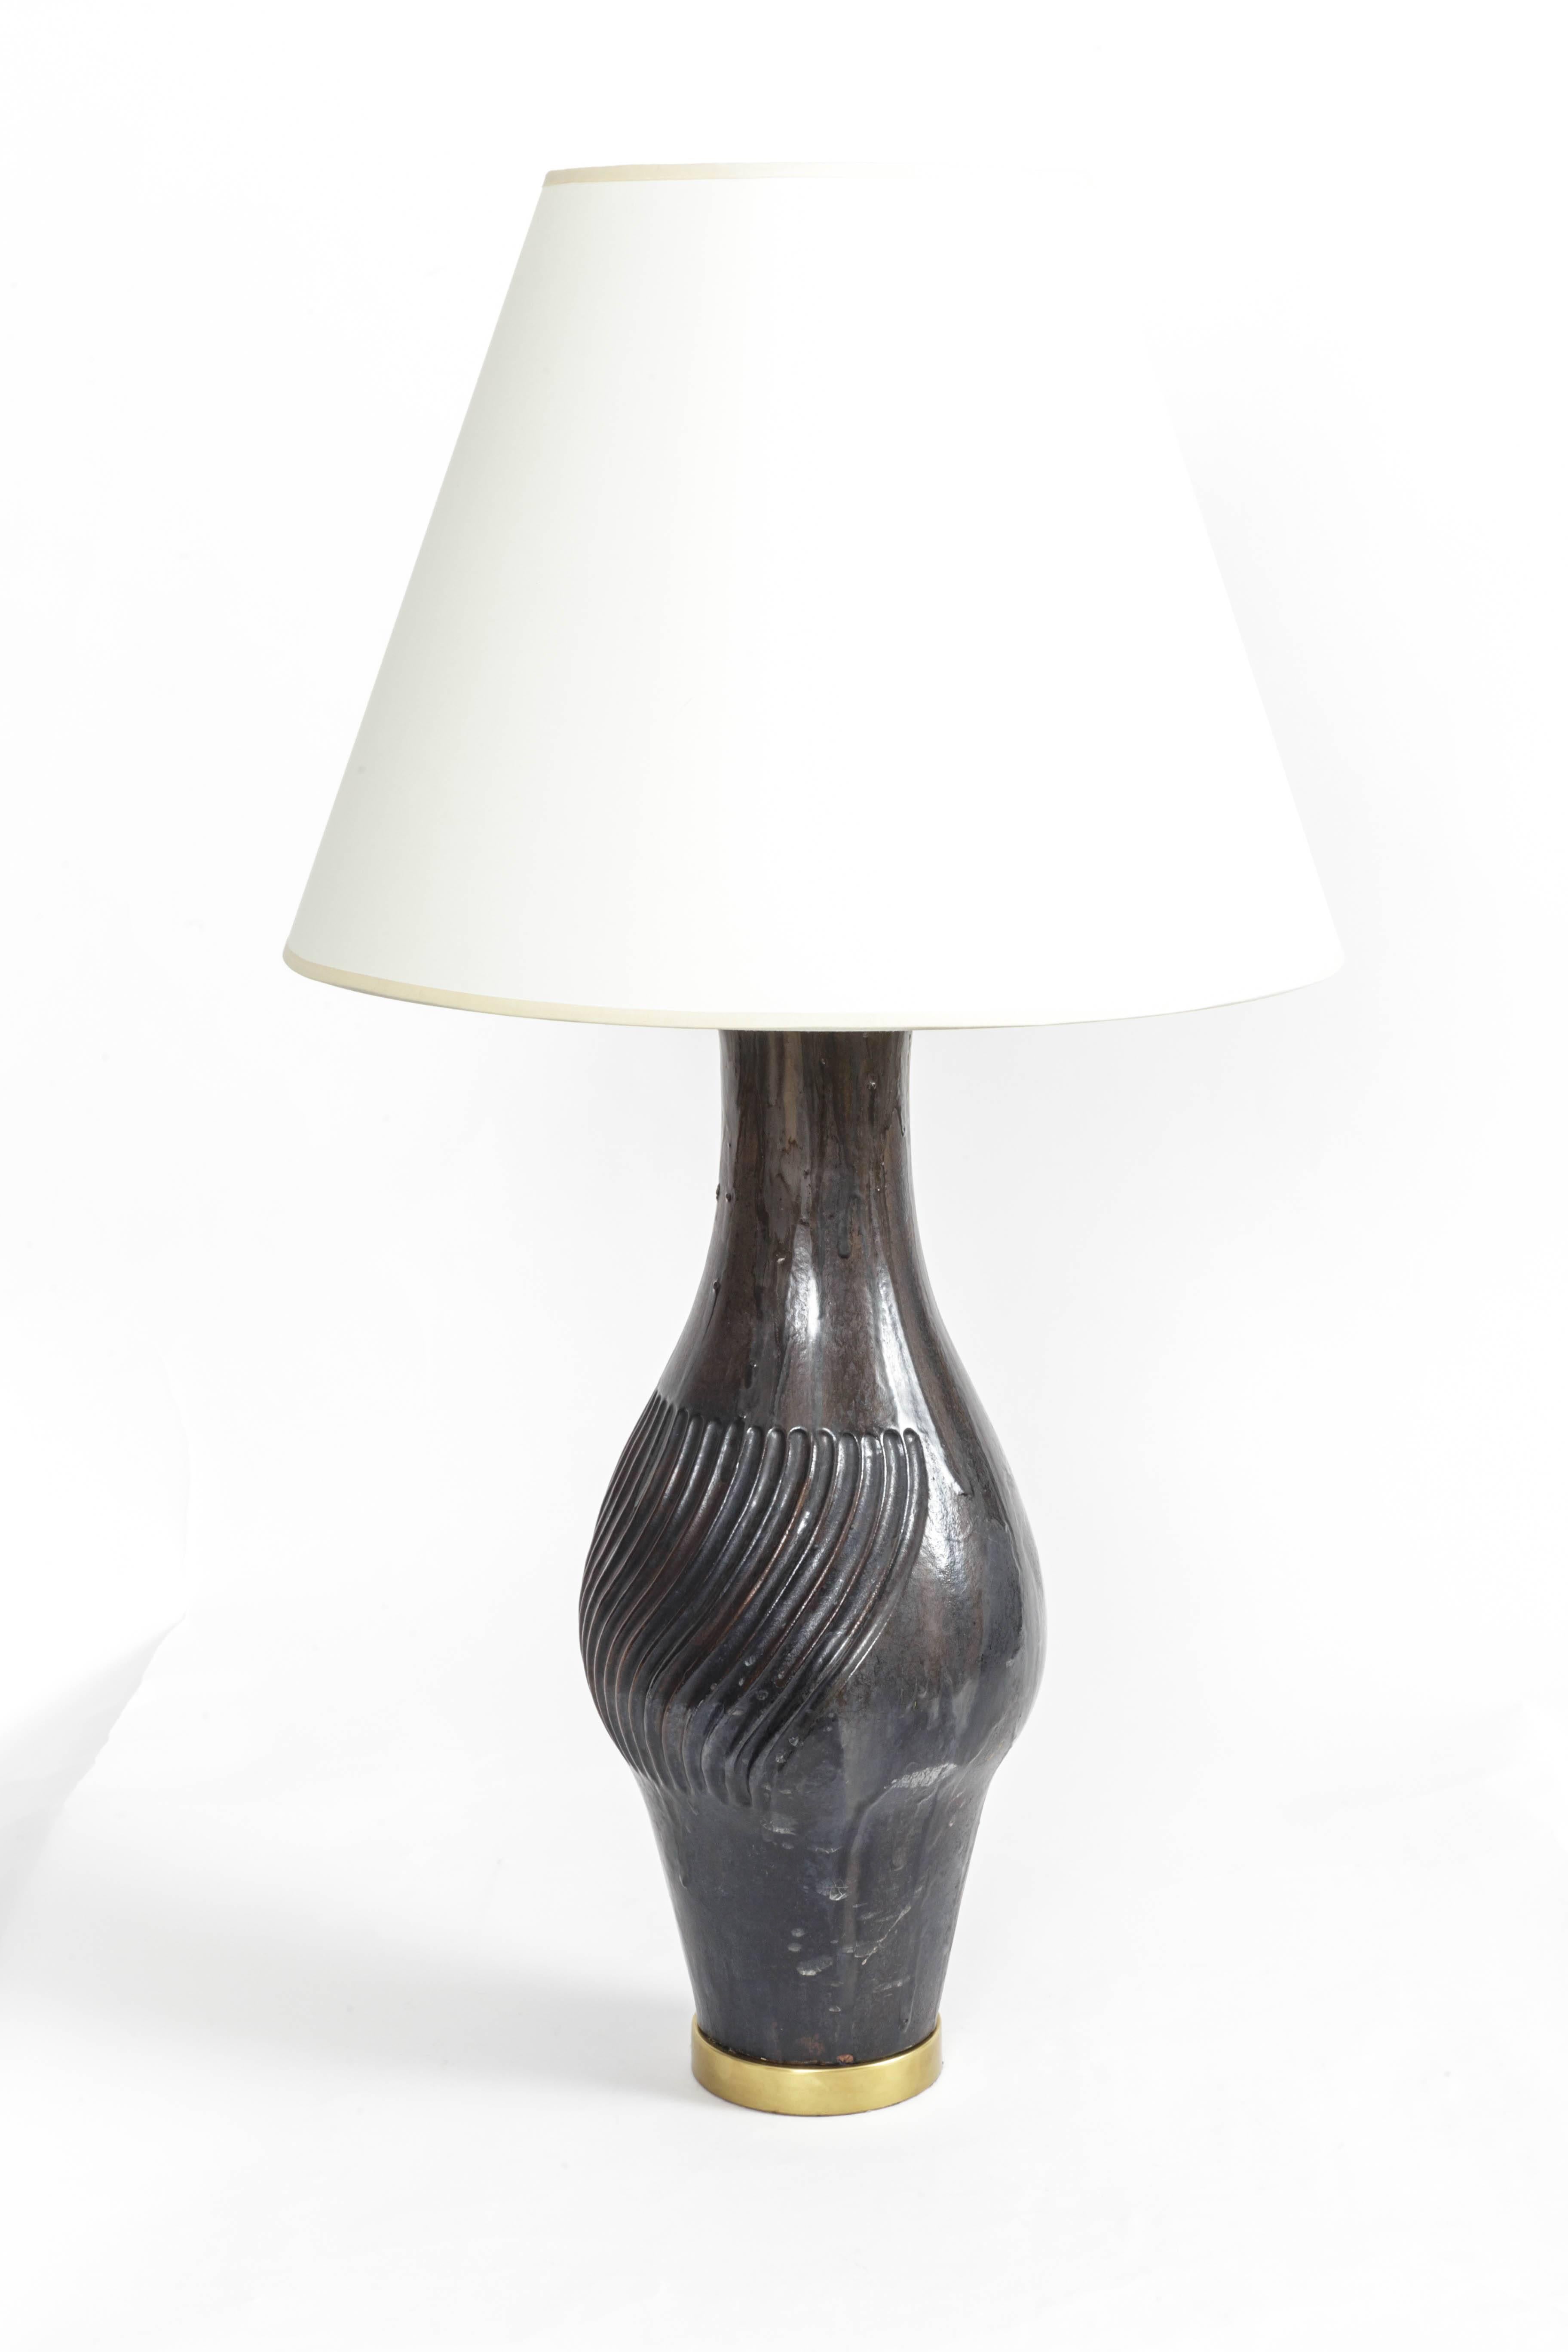 Large ceramic and brass table lamp by Marcello Fantoni, Italy, 1958. 

With its sculptural shape and wavy incisions, this stunning table lamp is a testament to Fantoni's sense of composition, sensitive handiwork, and overall artistry as a